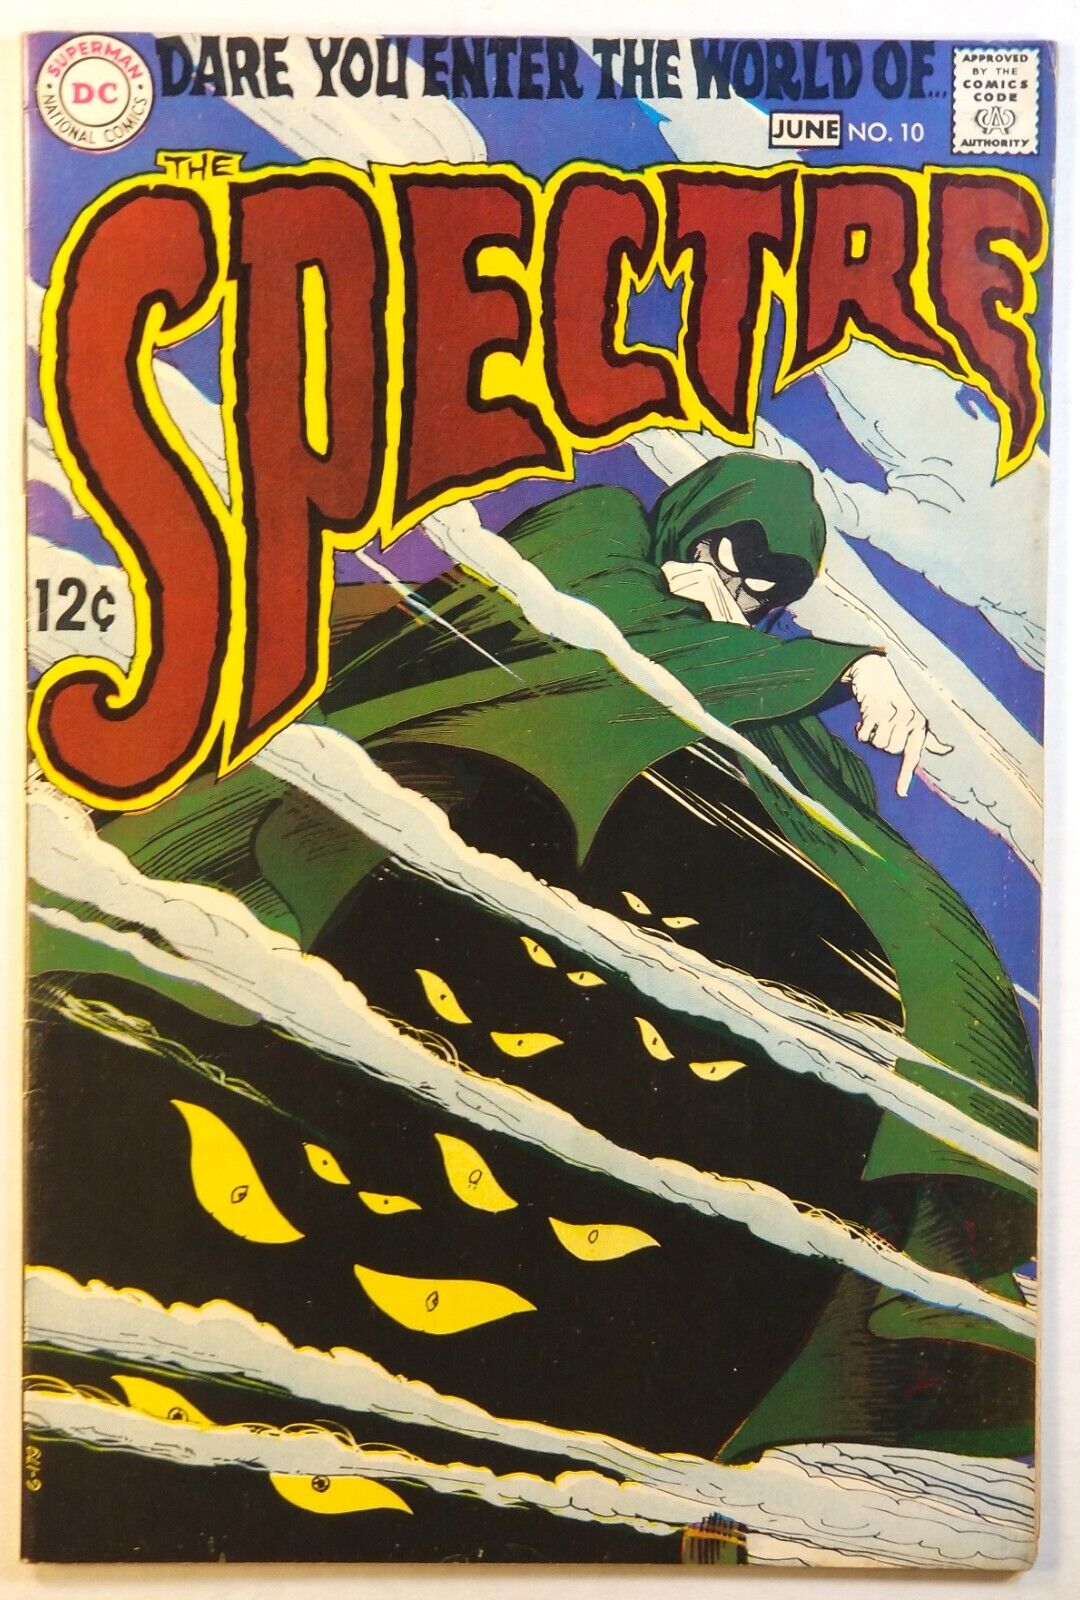 THE SPECTRE #10 DC Comics 1969 F+ 6.5 Nick Cardy cover "Footsteps Of Disaster"